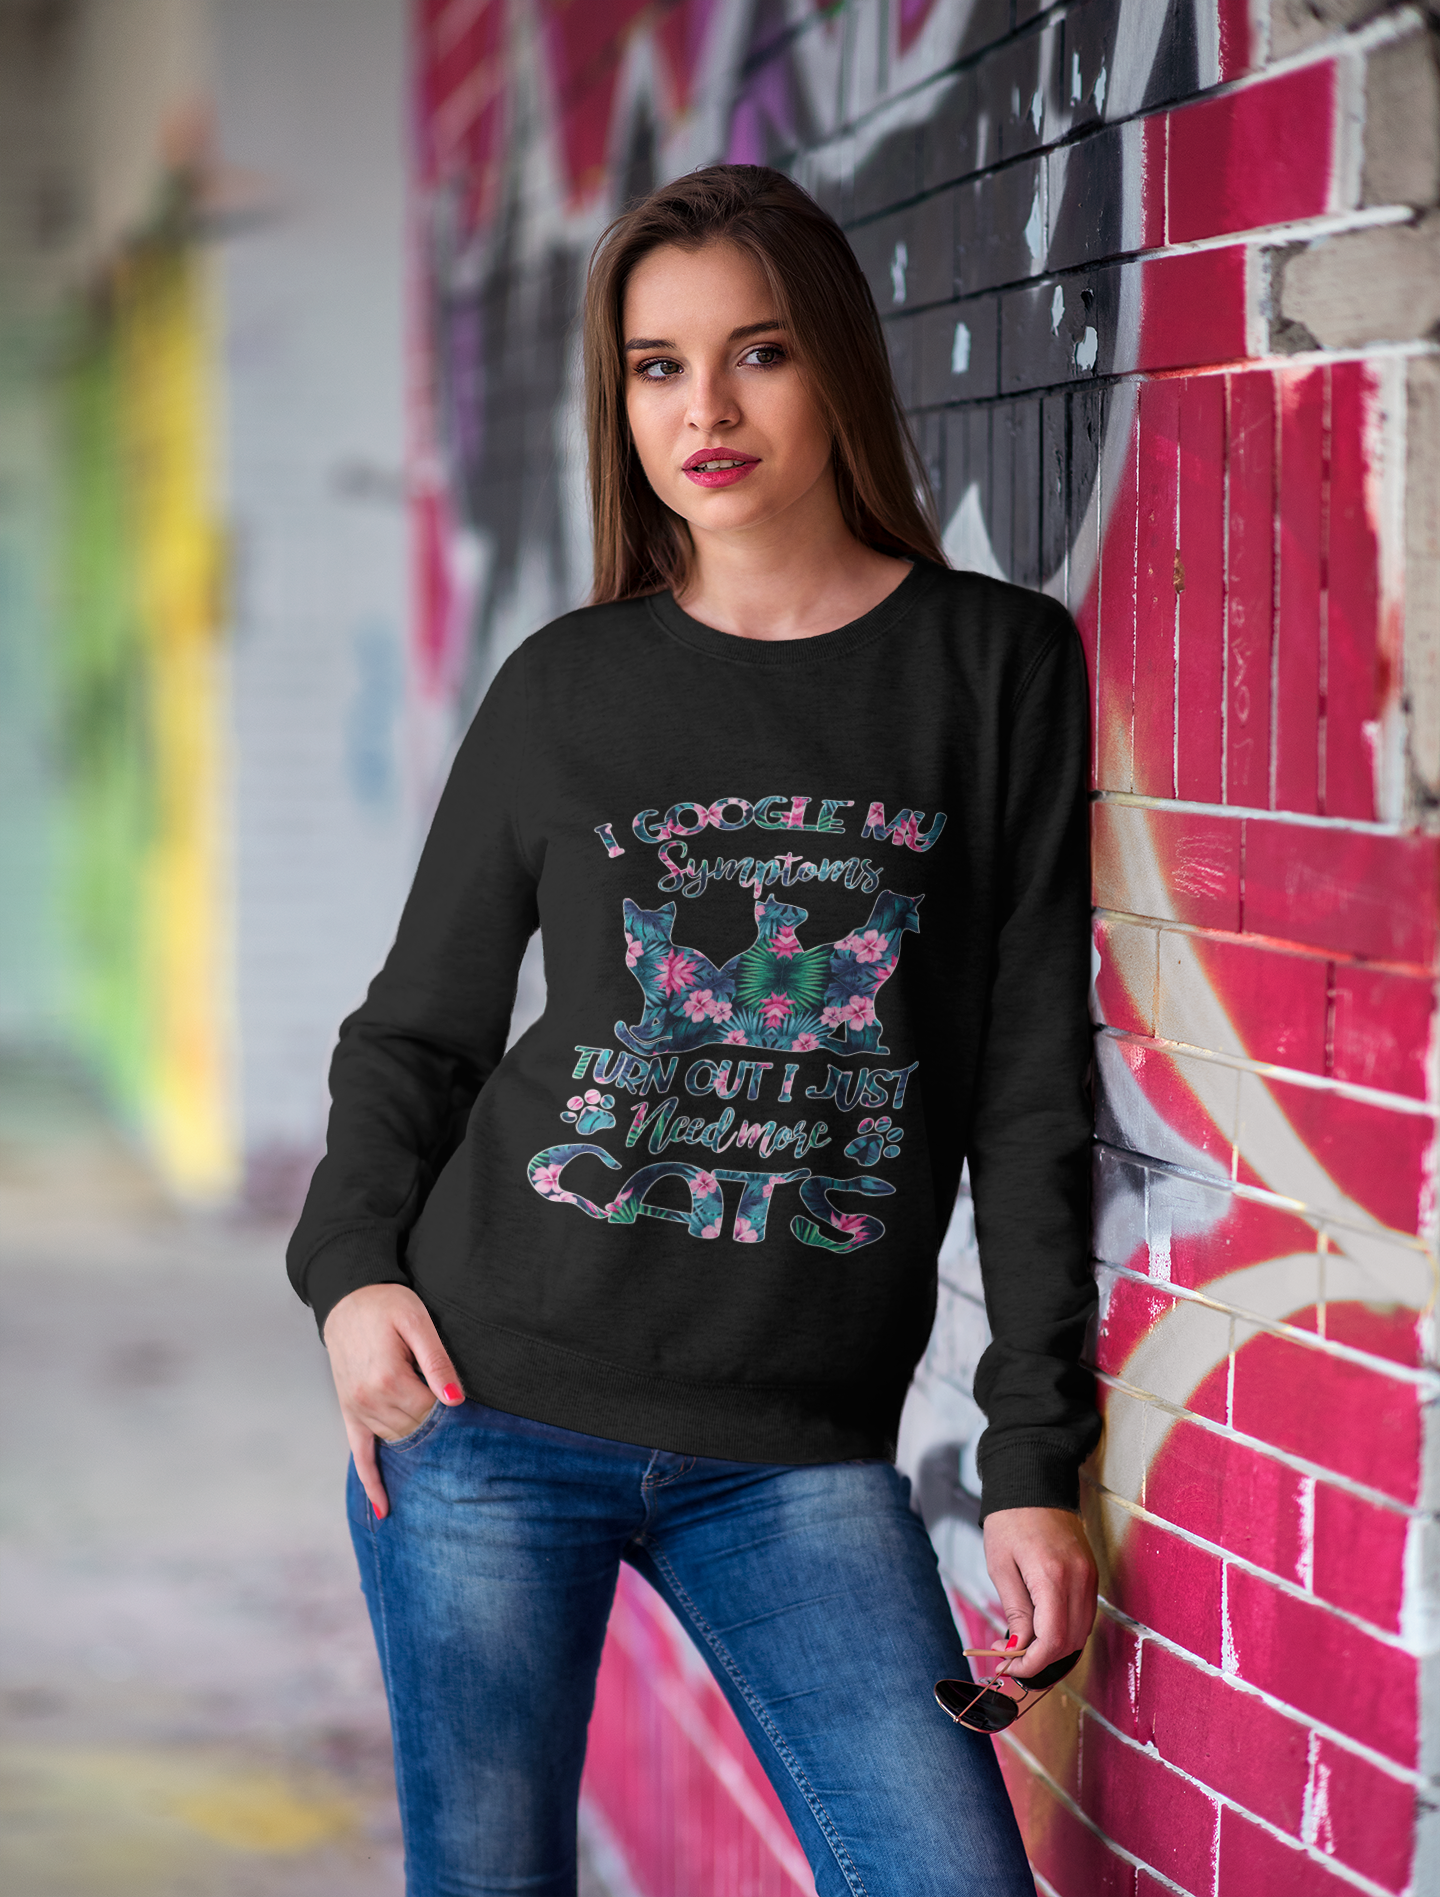 ULTRABASIC Women's Sweatshirt Need More Cats - Sully For Cat Lovers - Cat Paws